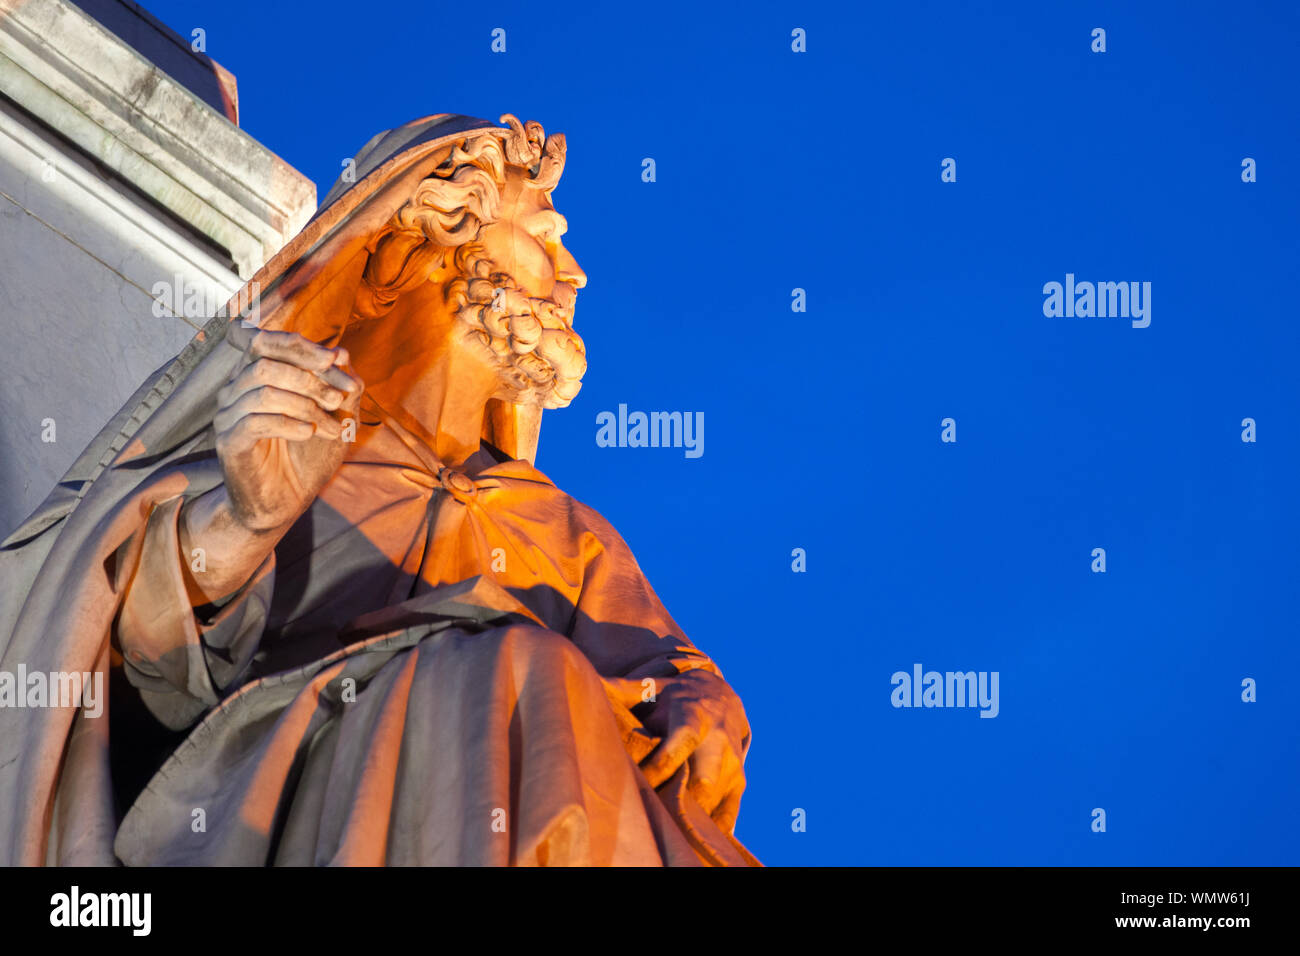 Detail of statue of Isaiah (by Salvatore Revelli) from Column of the Immaculate Conception, Piazza Mignanelli, Piazza de Spagna, Rome, Italy Stock Photo